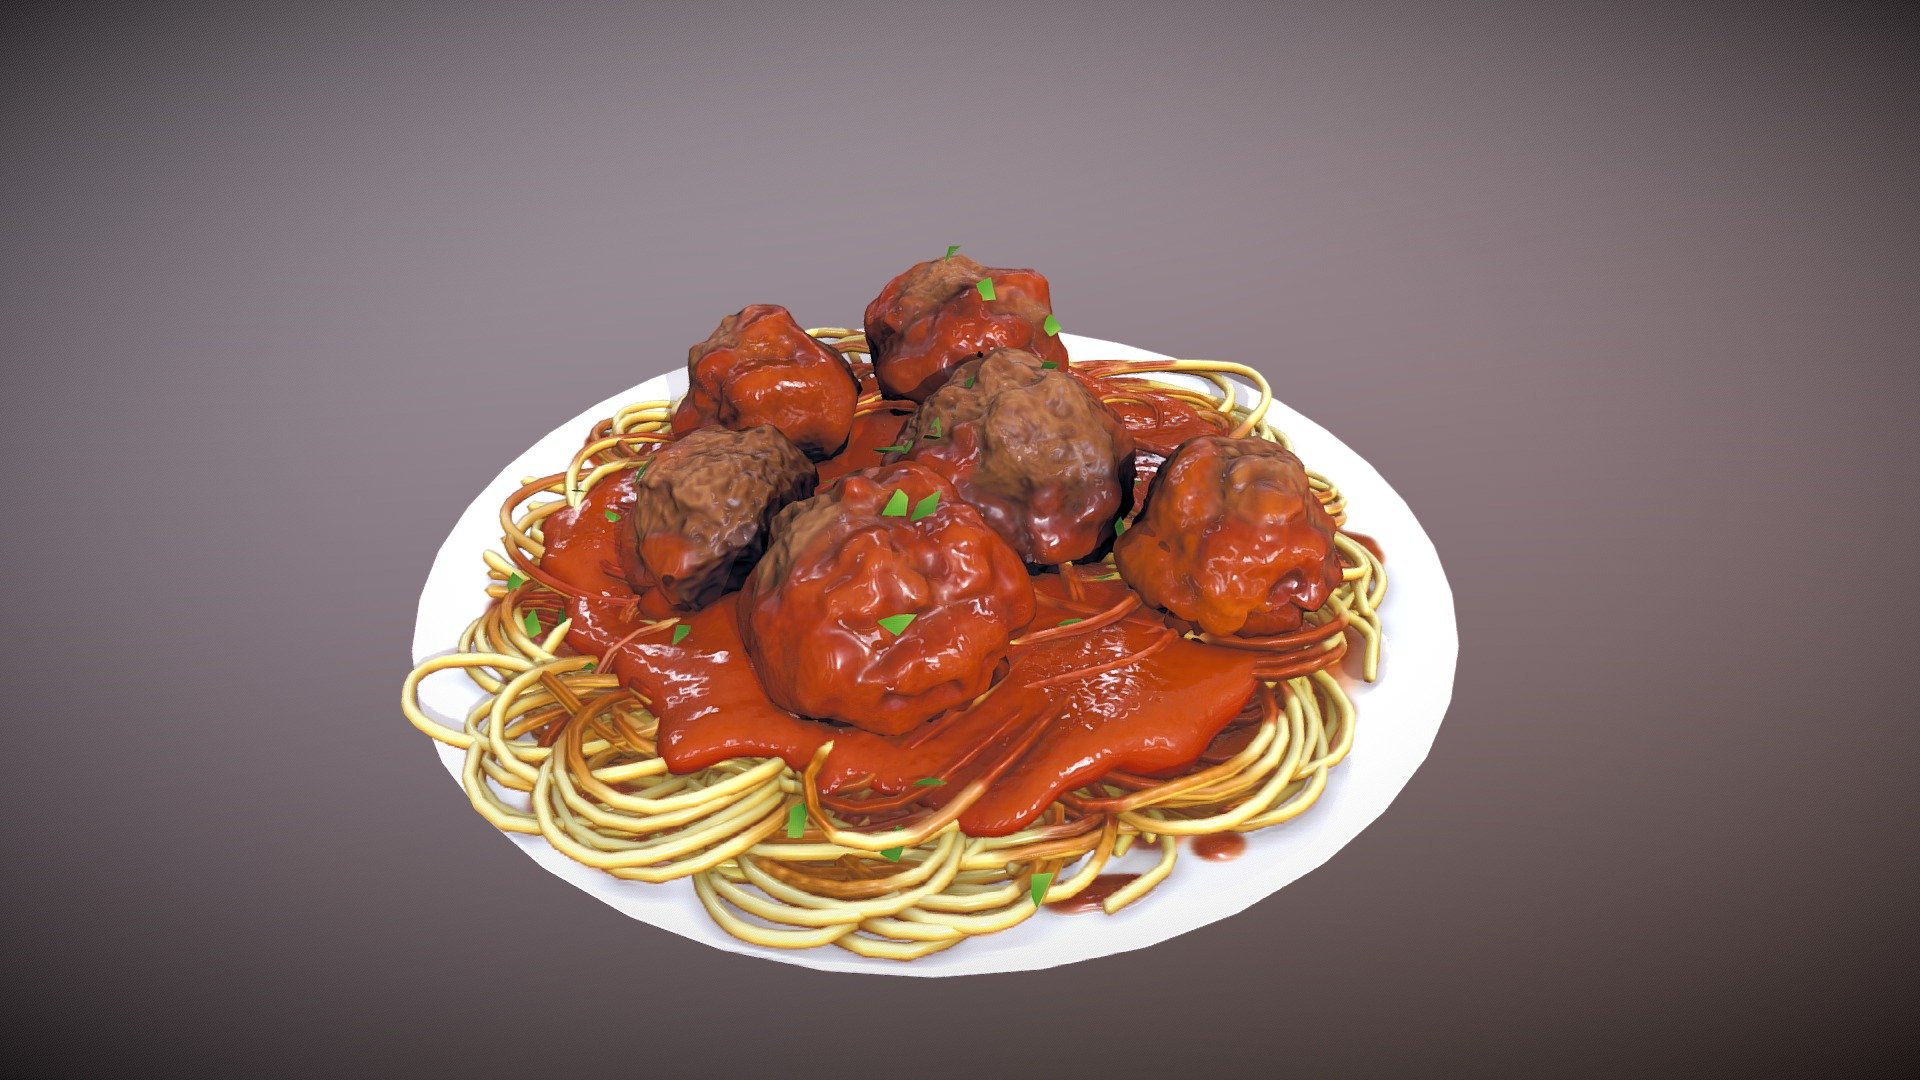 Plate of spaghet and meatballs.

Hahaha this started out lowpoly and then I tried to model the actual noodles 3d model